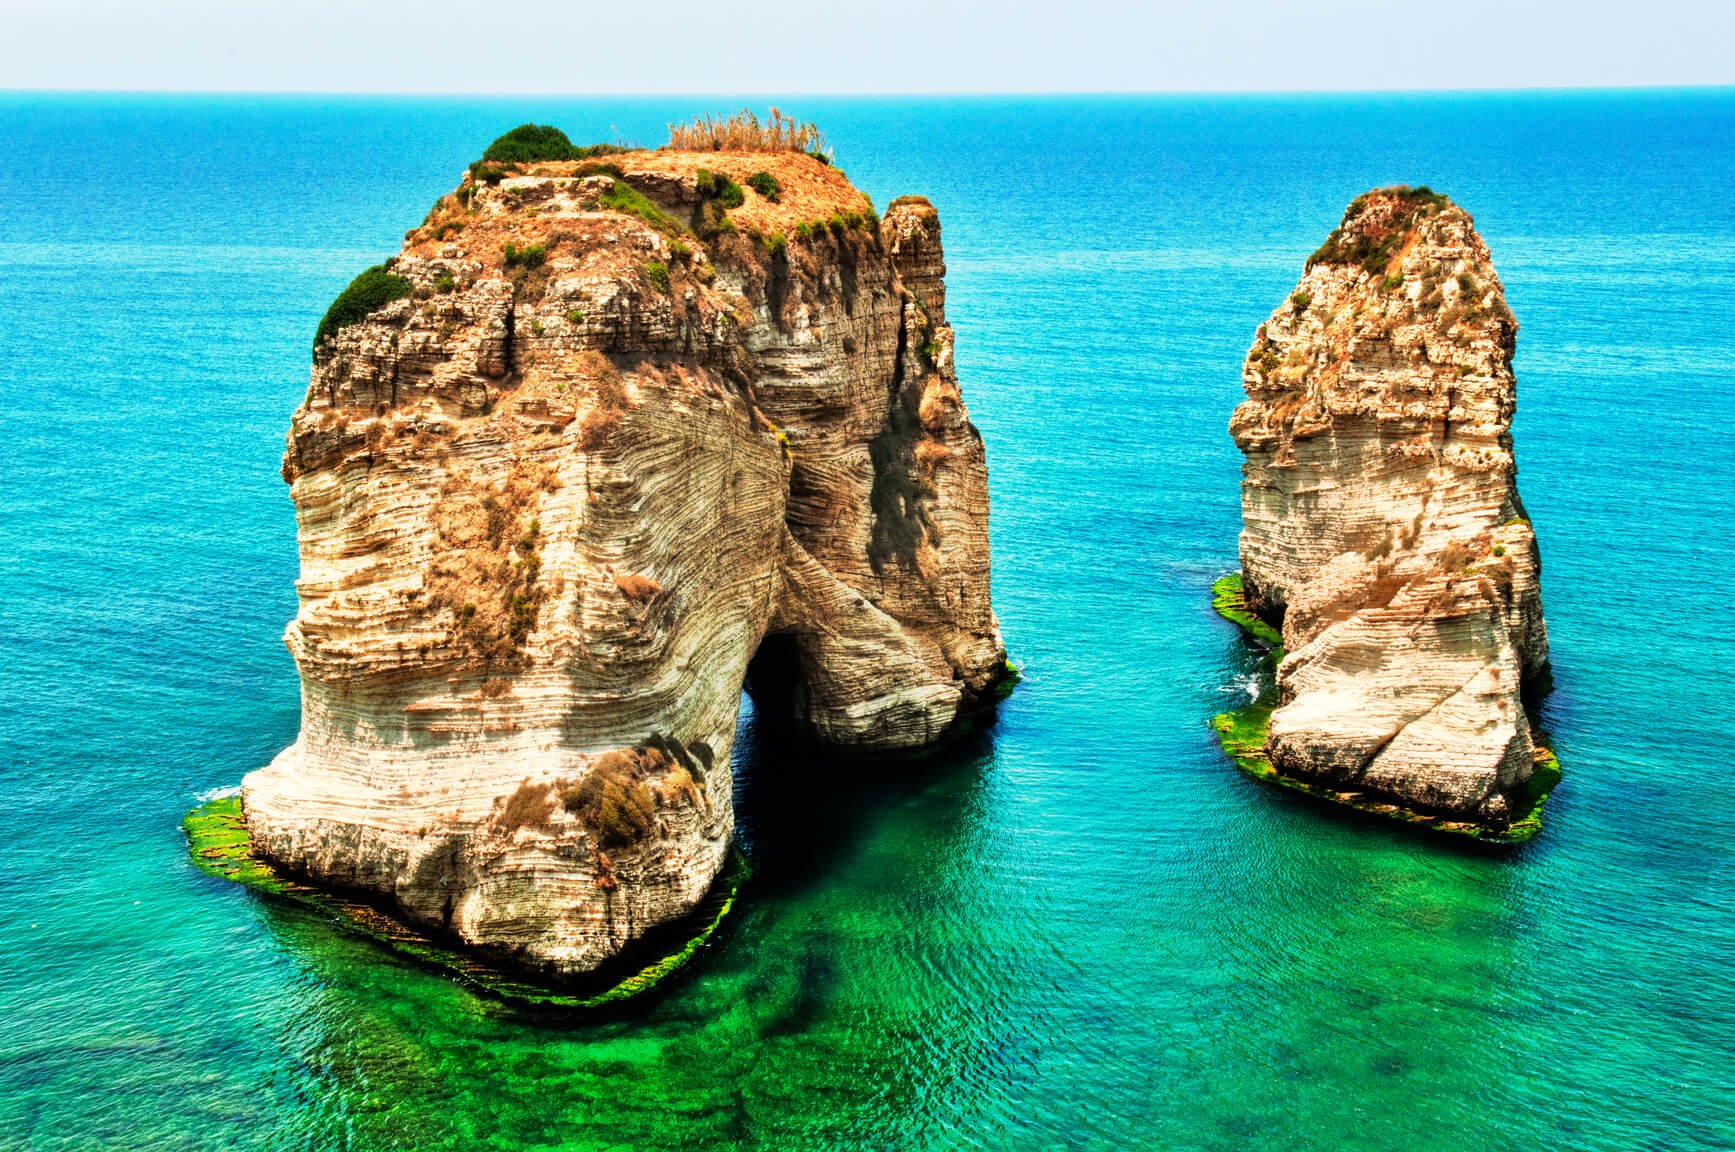 Non-stop from Amsterdam, Netherlands to Beirut, Lebanon for only €98 roundtrip